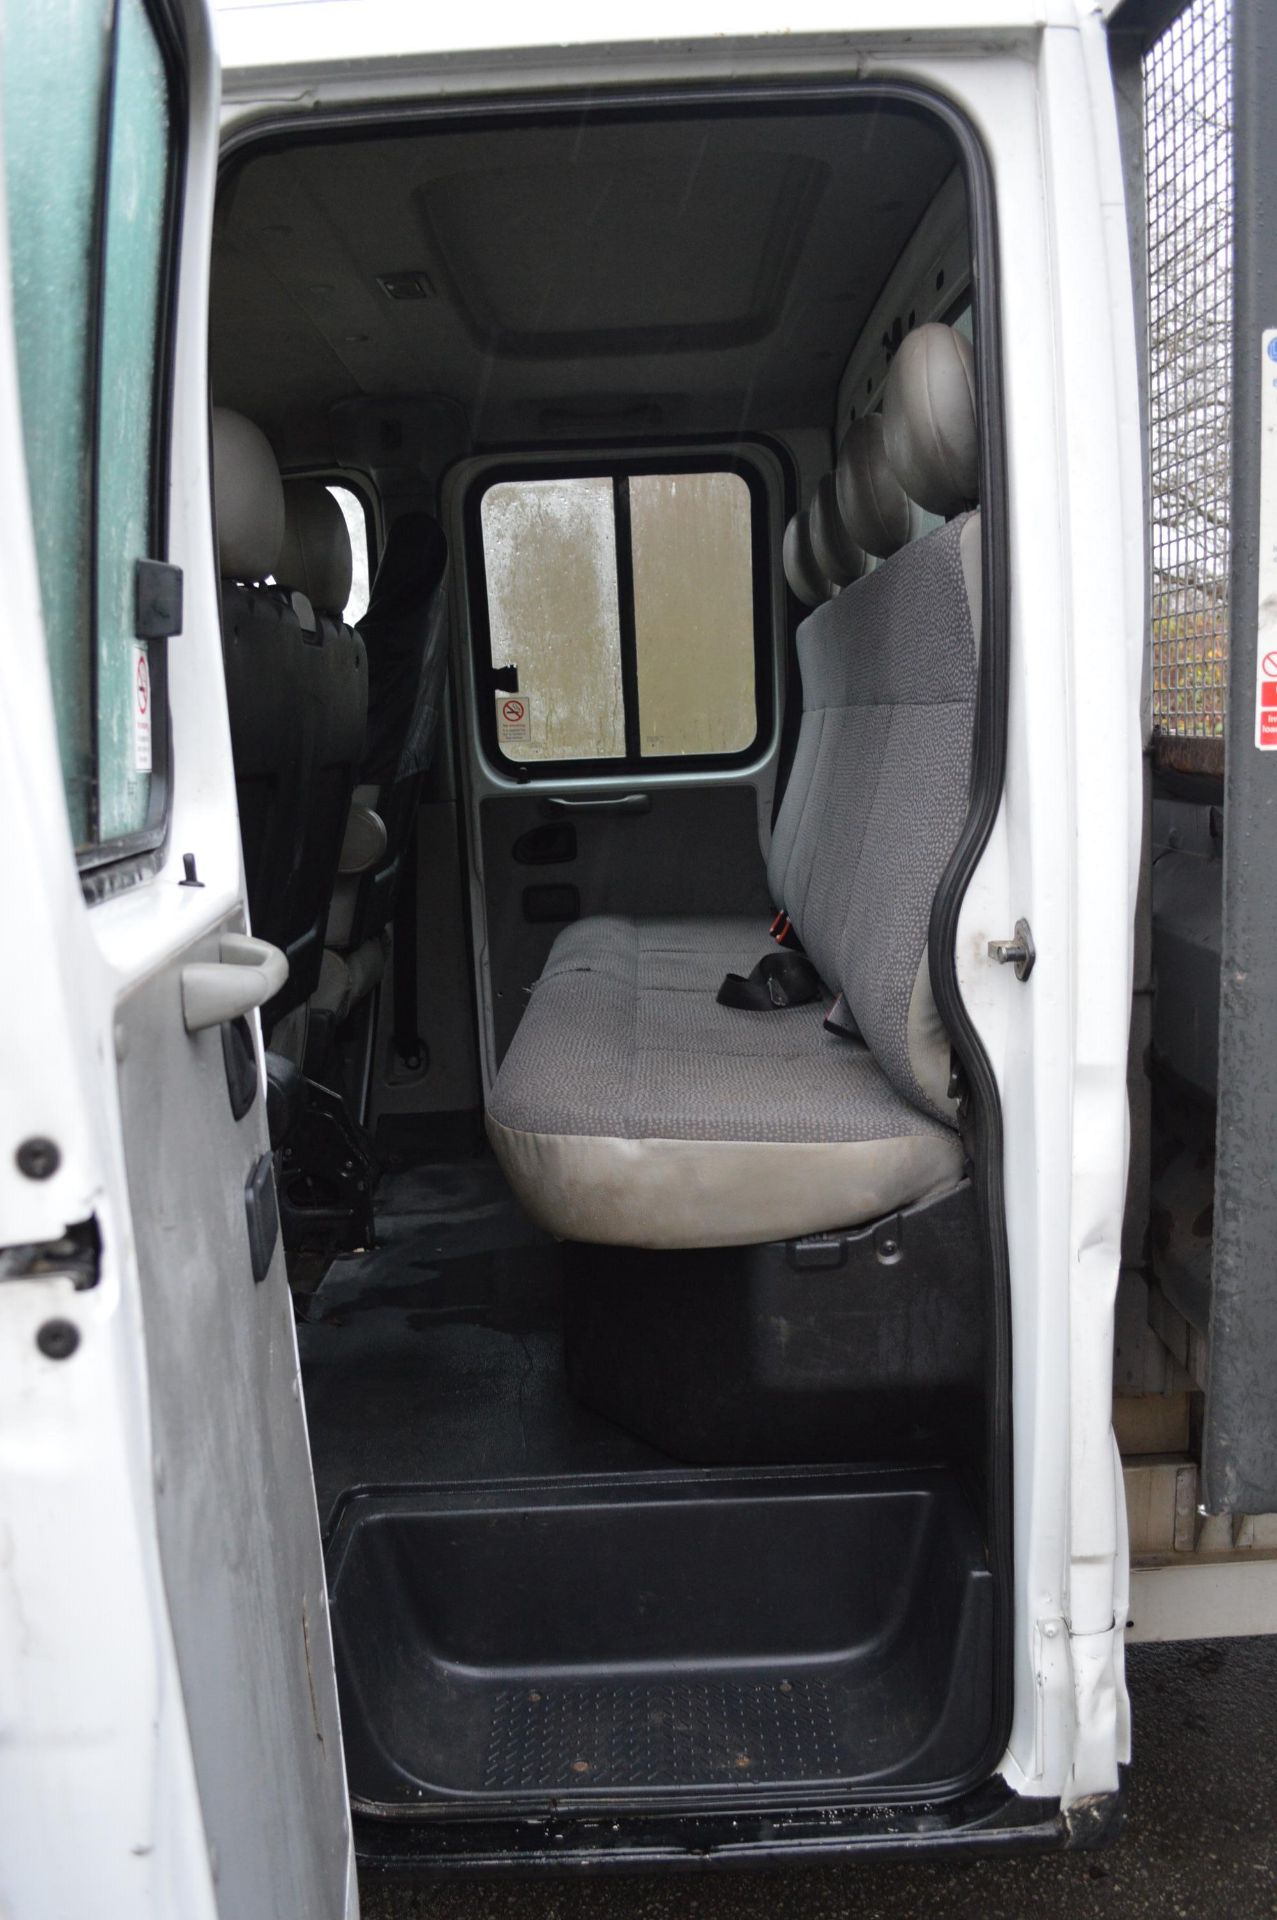 2009/59 REG VAUXHALL MOVANO 3500 CDTI LWB DOUBLE CAB TIPPER, SHOWING 2 FORMER KEEPERS *NO VAT* - Image 8 of 18